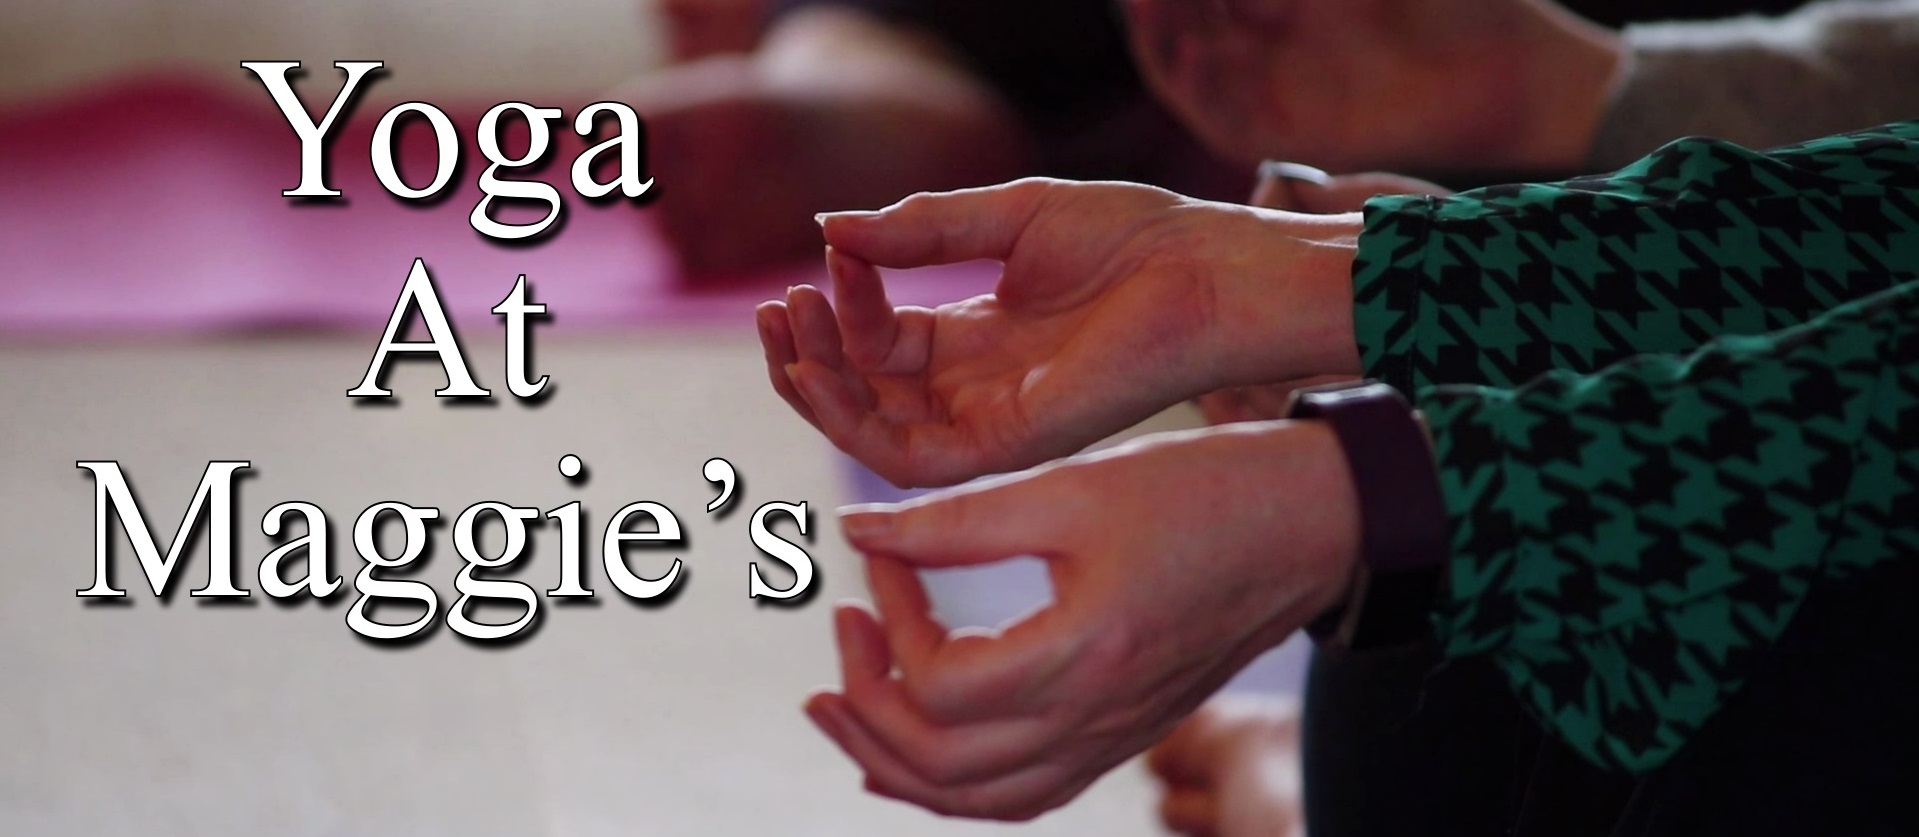 Yoga At Maggie's